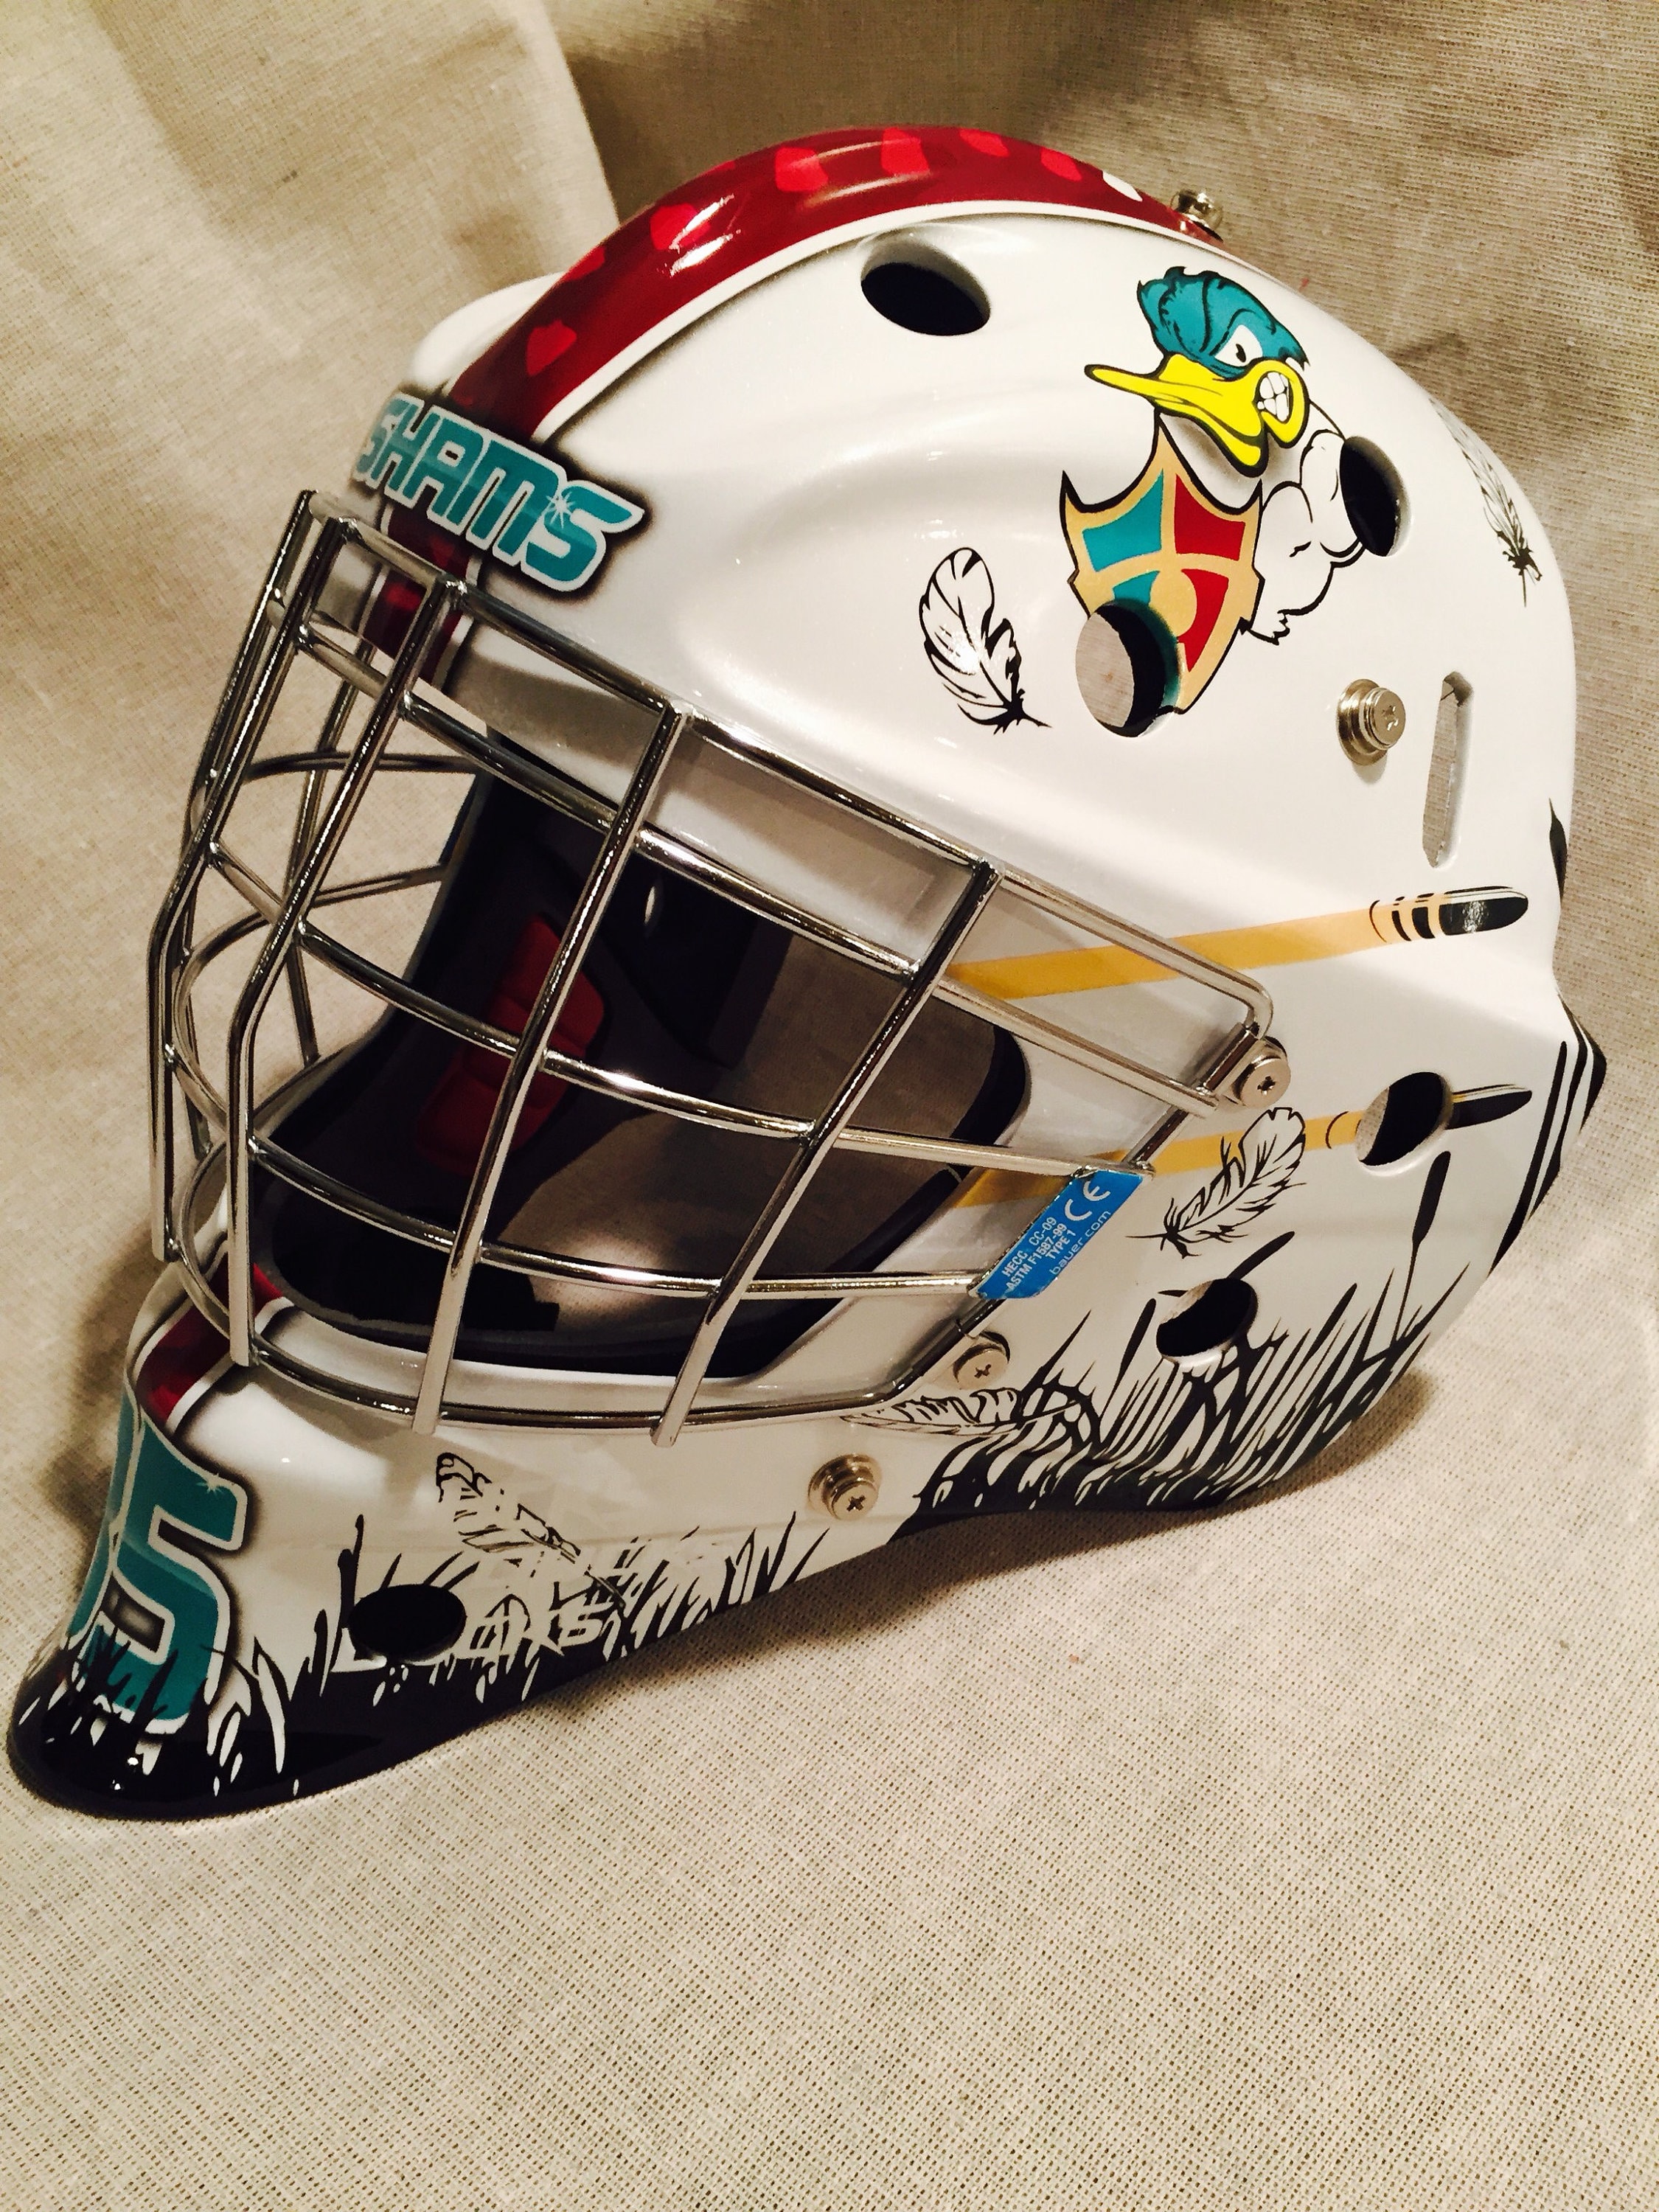 Custom Airbrushed Goalie Mask Artwork // Hand-Painted // Hockey// One-Of-A-Kind // All Makes and Models of Masks // Gift for Hockey Player Accessoires Hoeden & petten Helmen Sporthelmen 